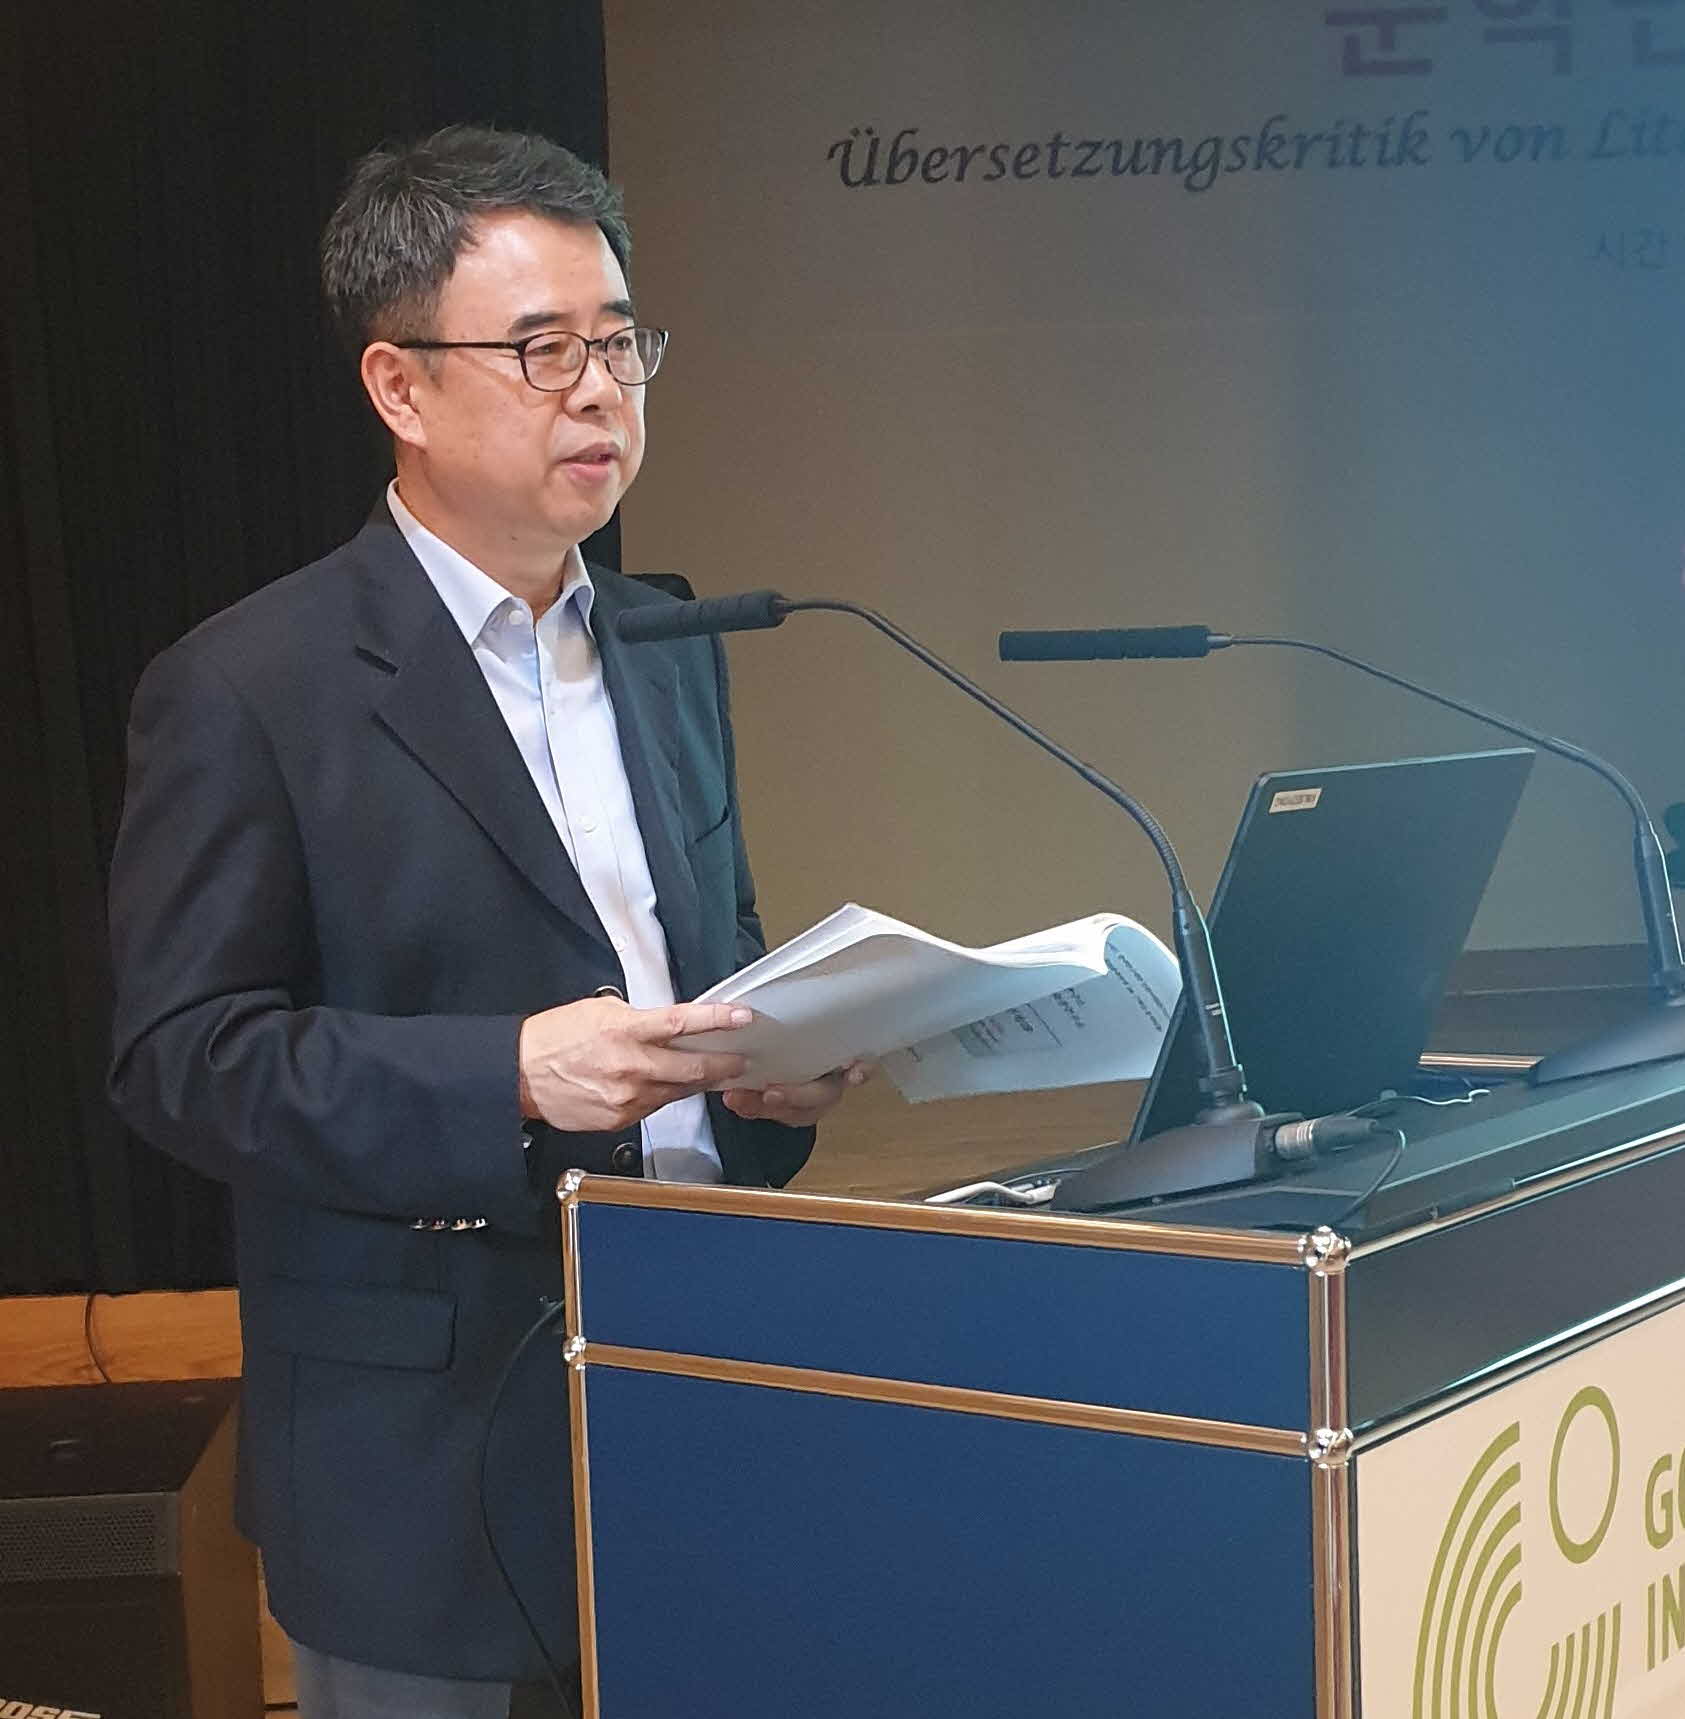 030 Referent Prof. KWON Son Hyoung.jpg